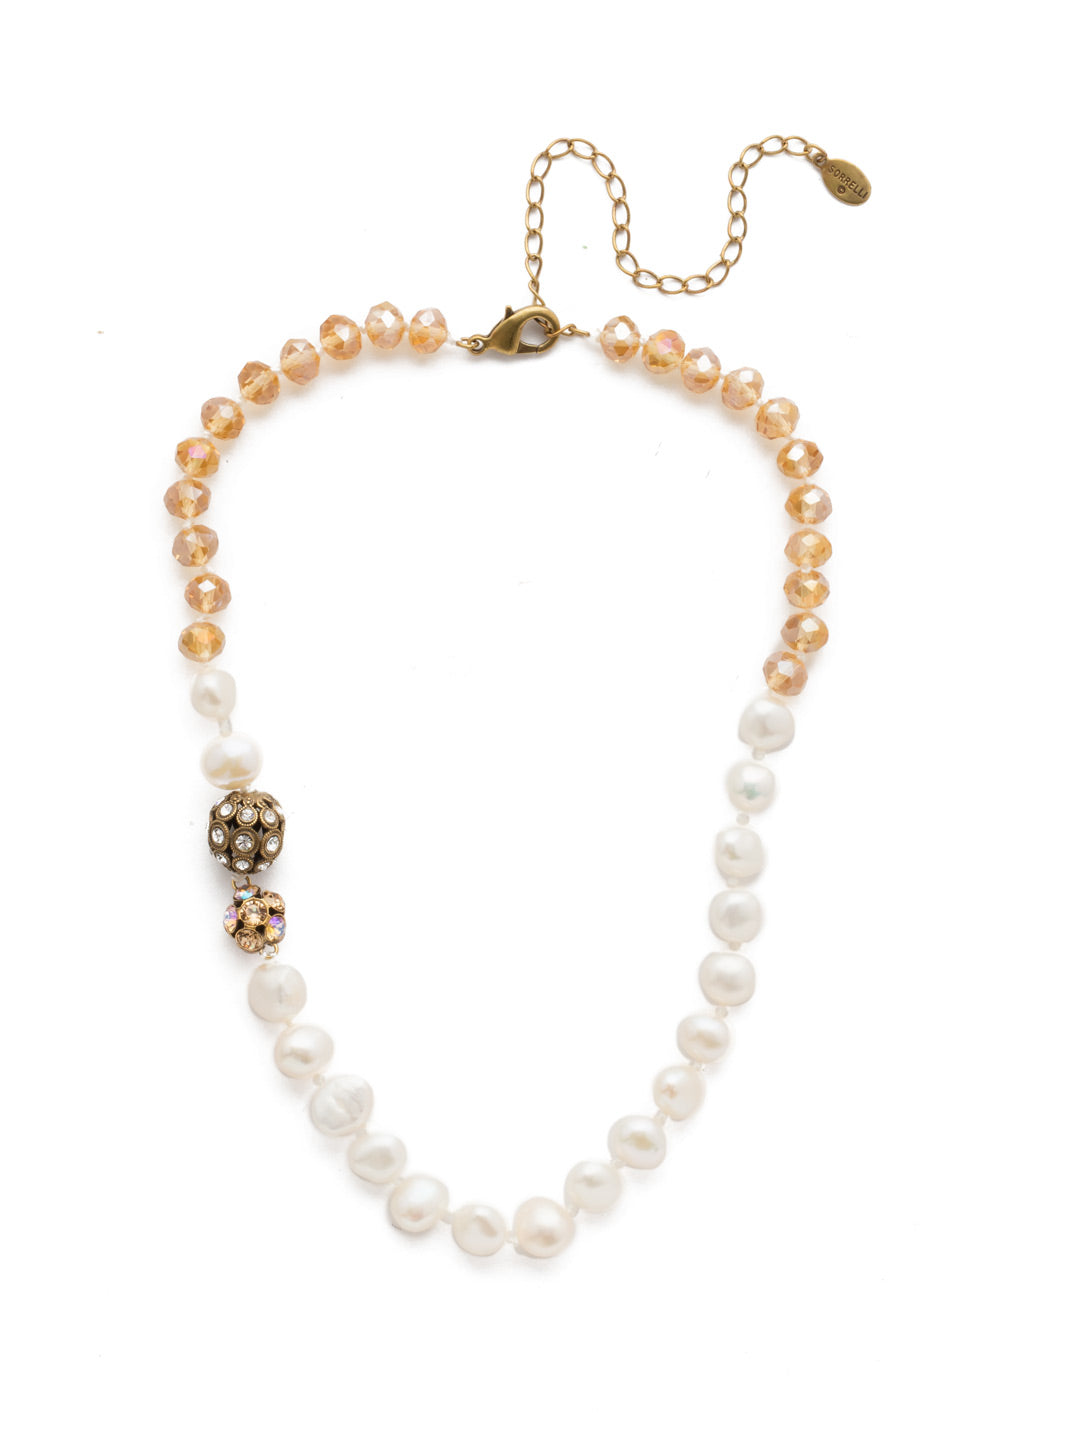 Cailey Tennis Necklace - NEF20AGROB - A classic necklace with an intricate pattern of pearls interrupted by two sparkling spheres. This is the perfect amount of sparkle that adds a little something extra to your evening out. From Sorrelli's Rocky Beach collection in our Antique Gold-tone finish.